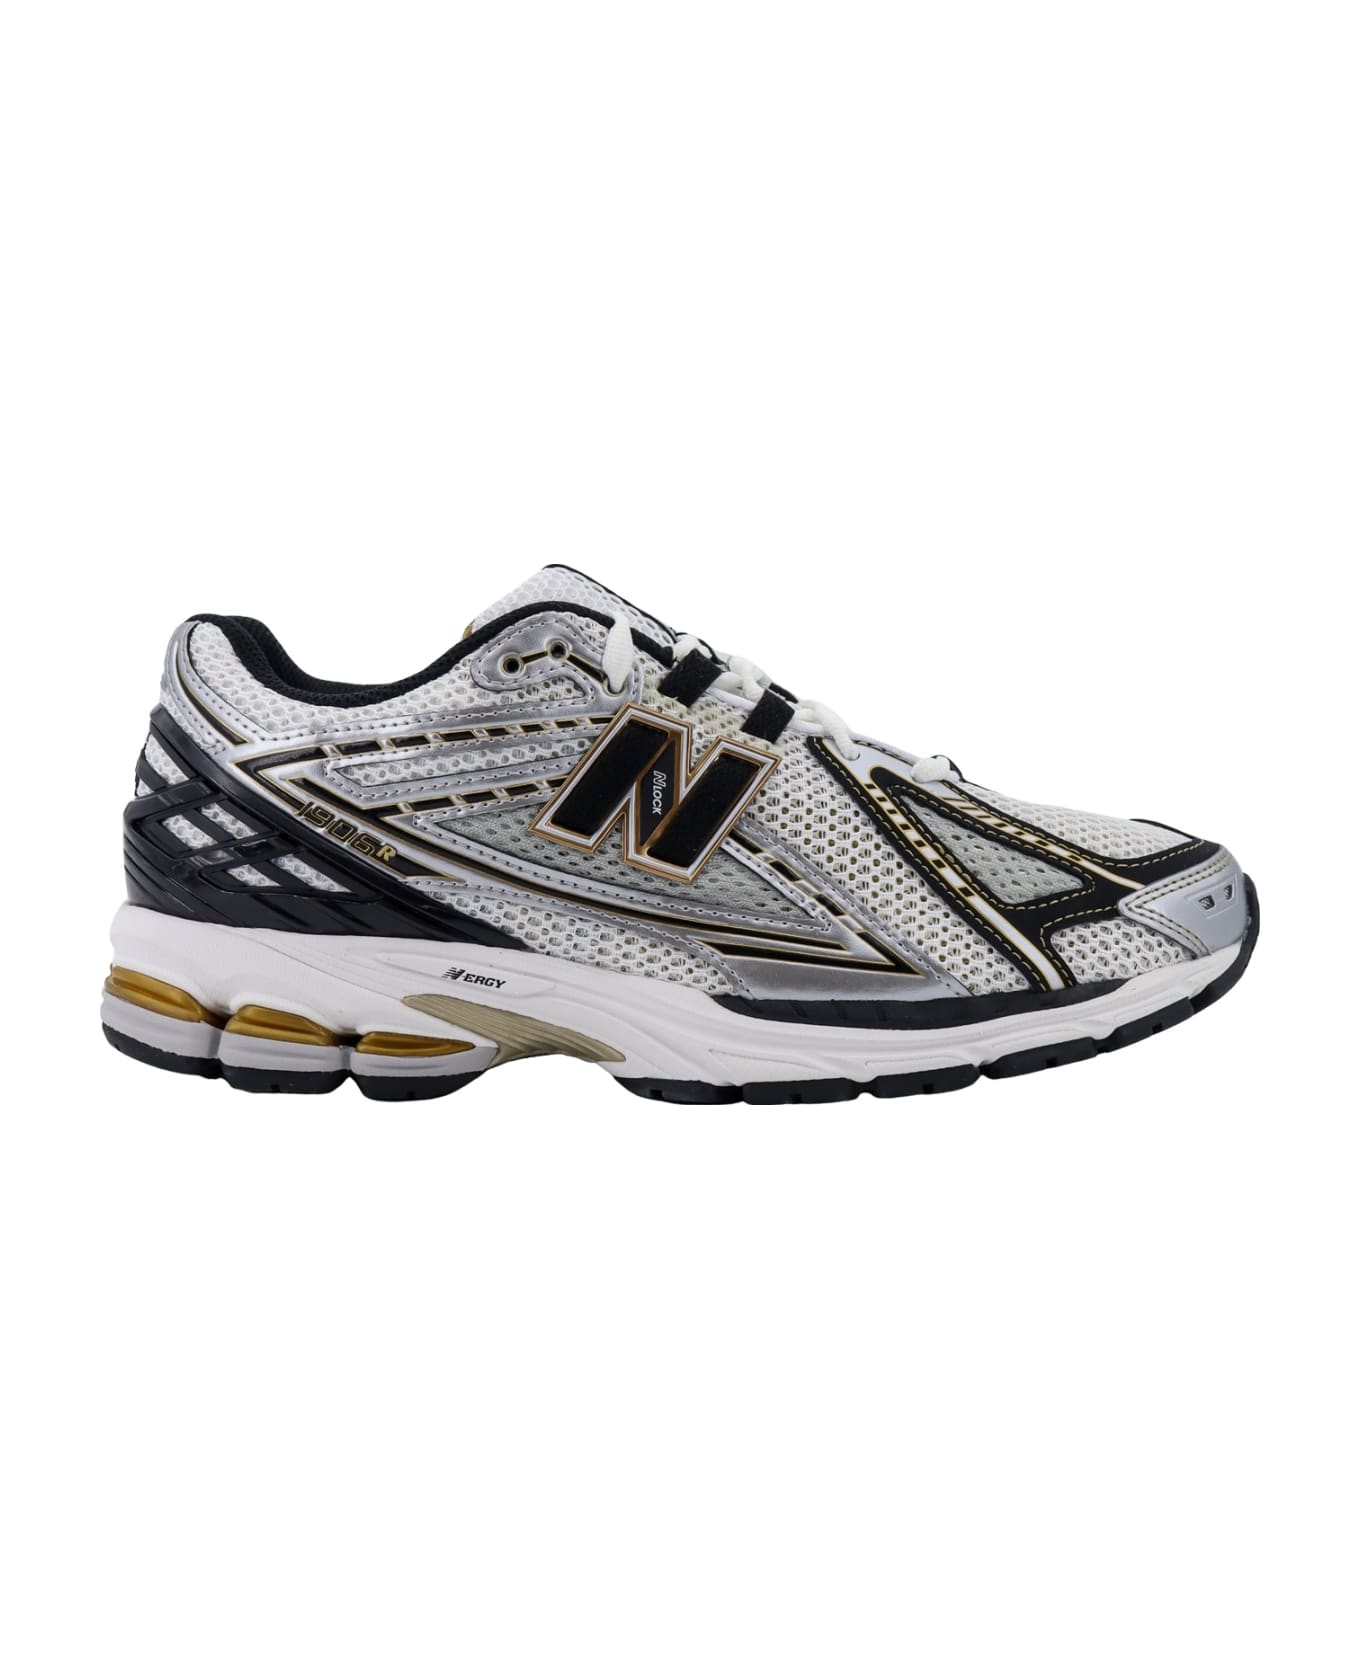 New Balance 1906 Sneakers - White Vintage Gold